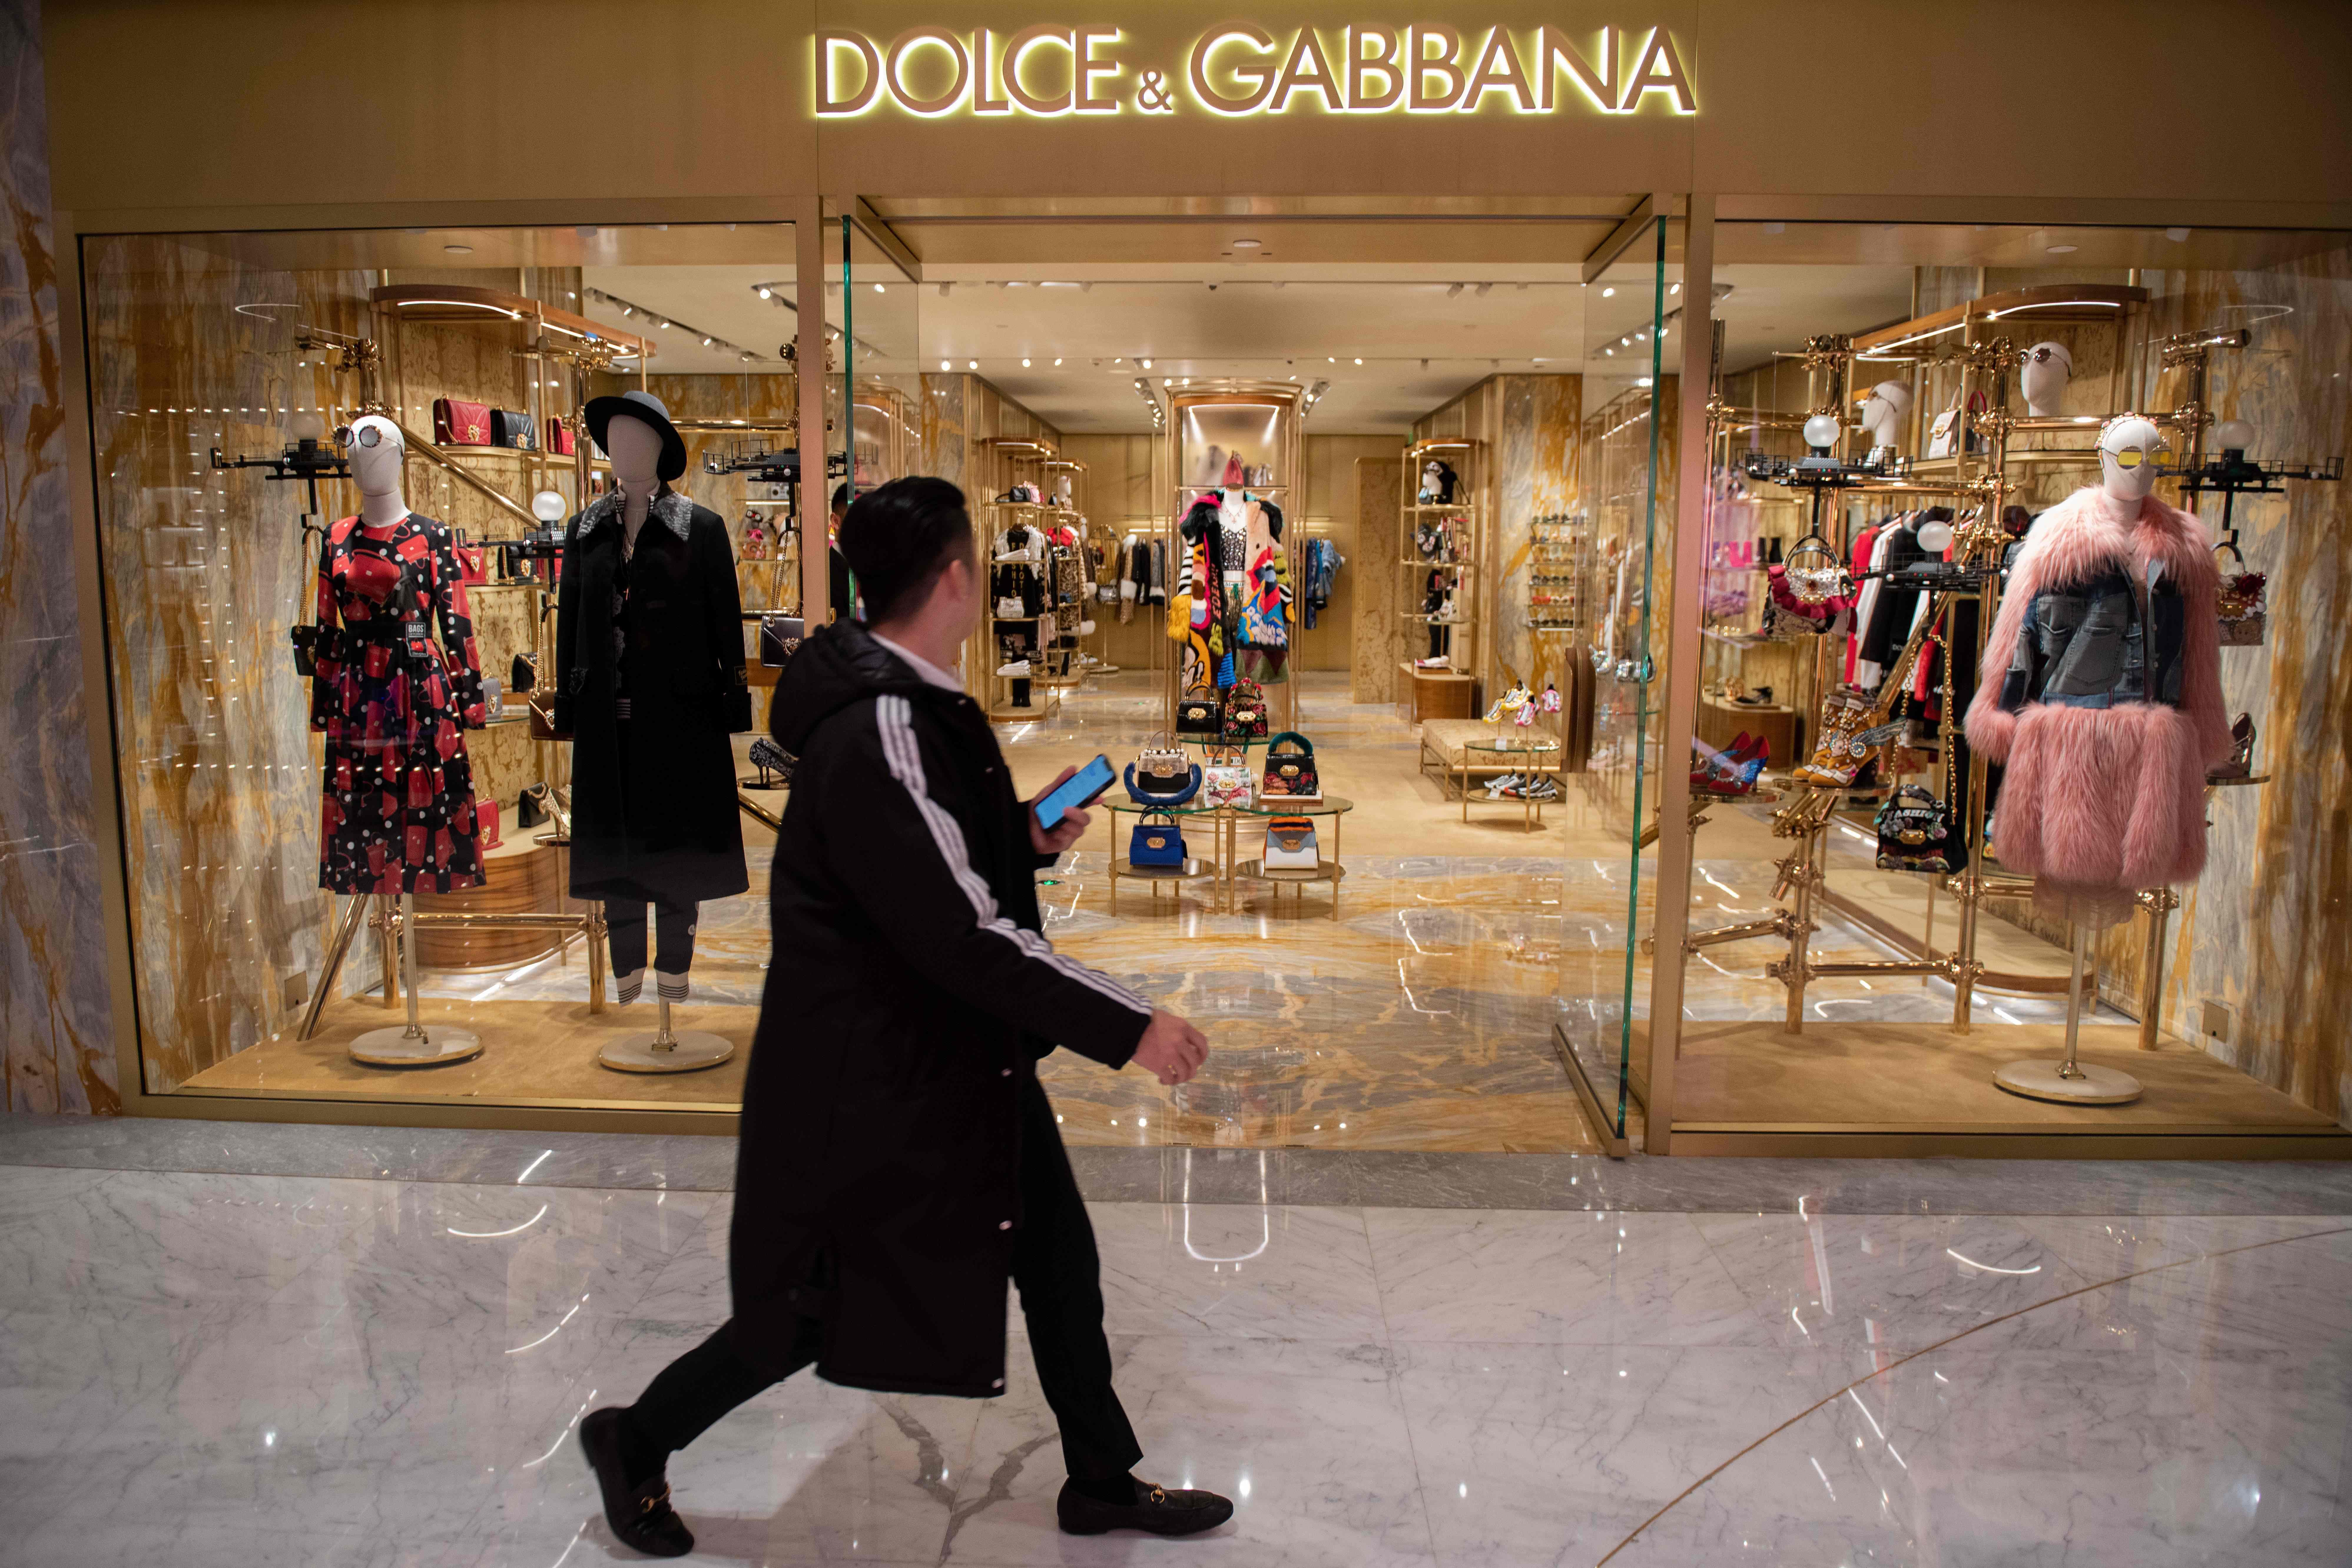 Dolce and Gabbana apologize following backlash over 'racist' ads